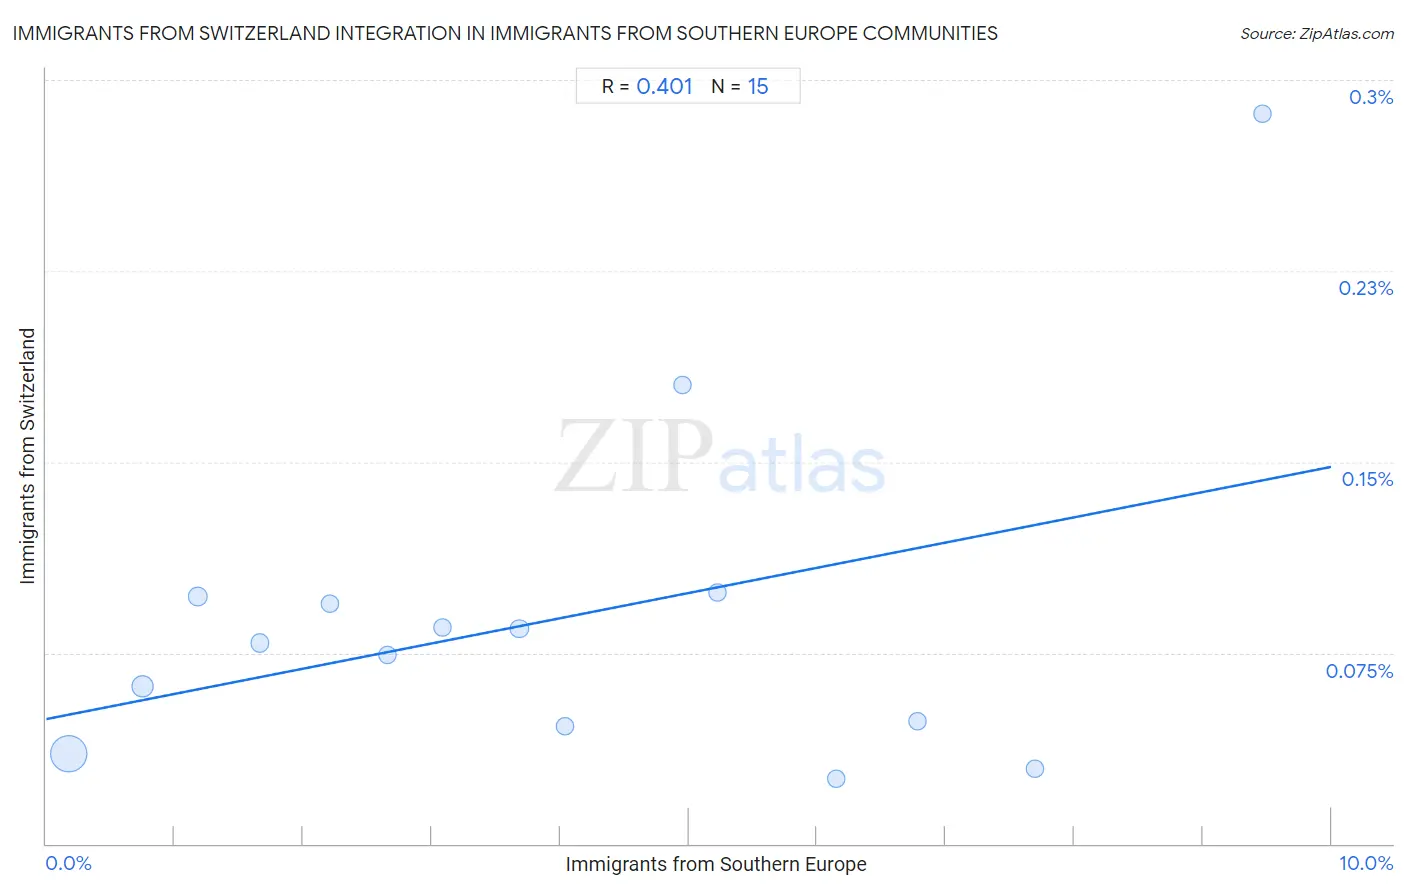 Immigrants from Southern Europe Integration in Immigrants from Switzerland Communities